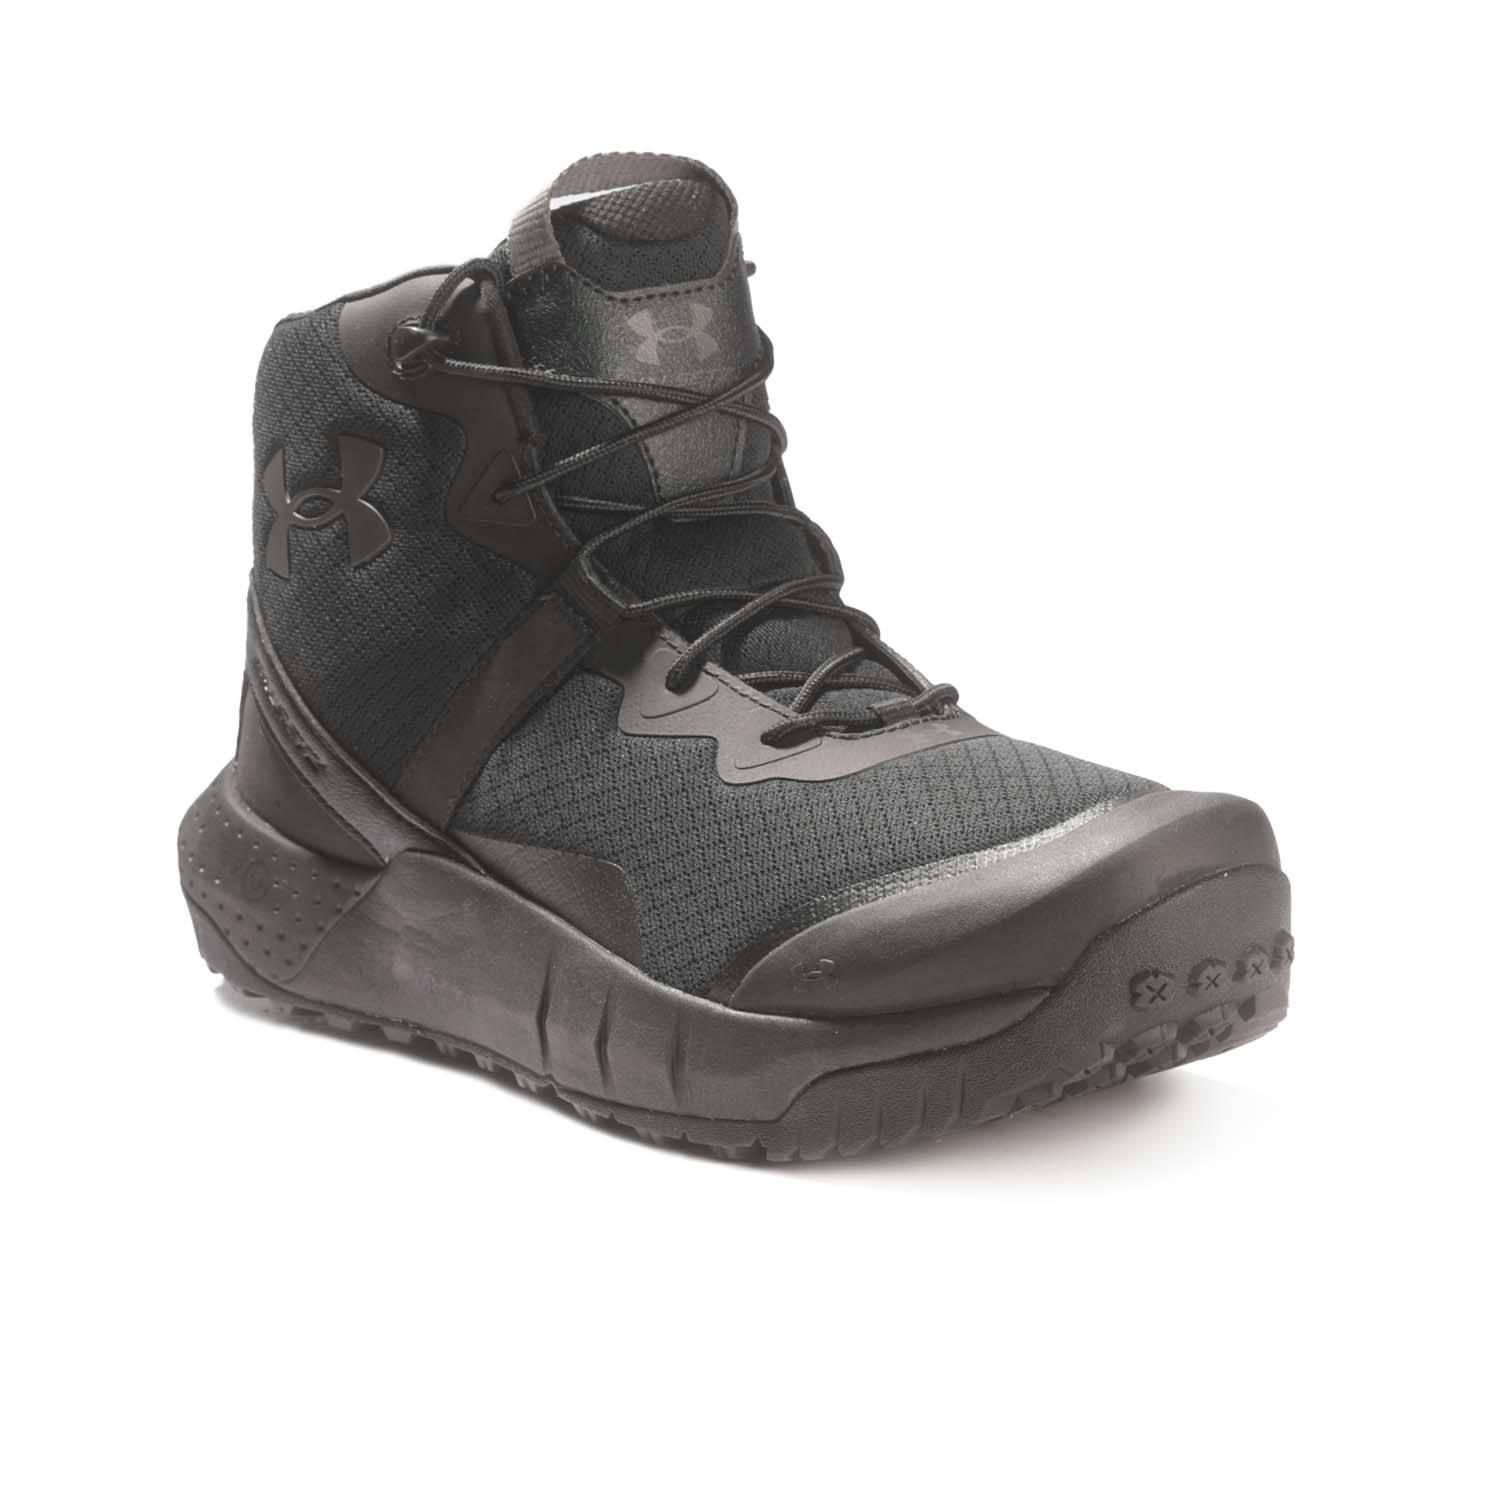 Under Armour Valsetz Mid Leather Tactical Boots Review 